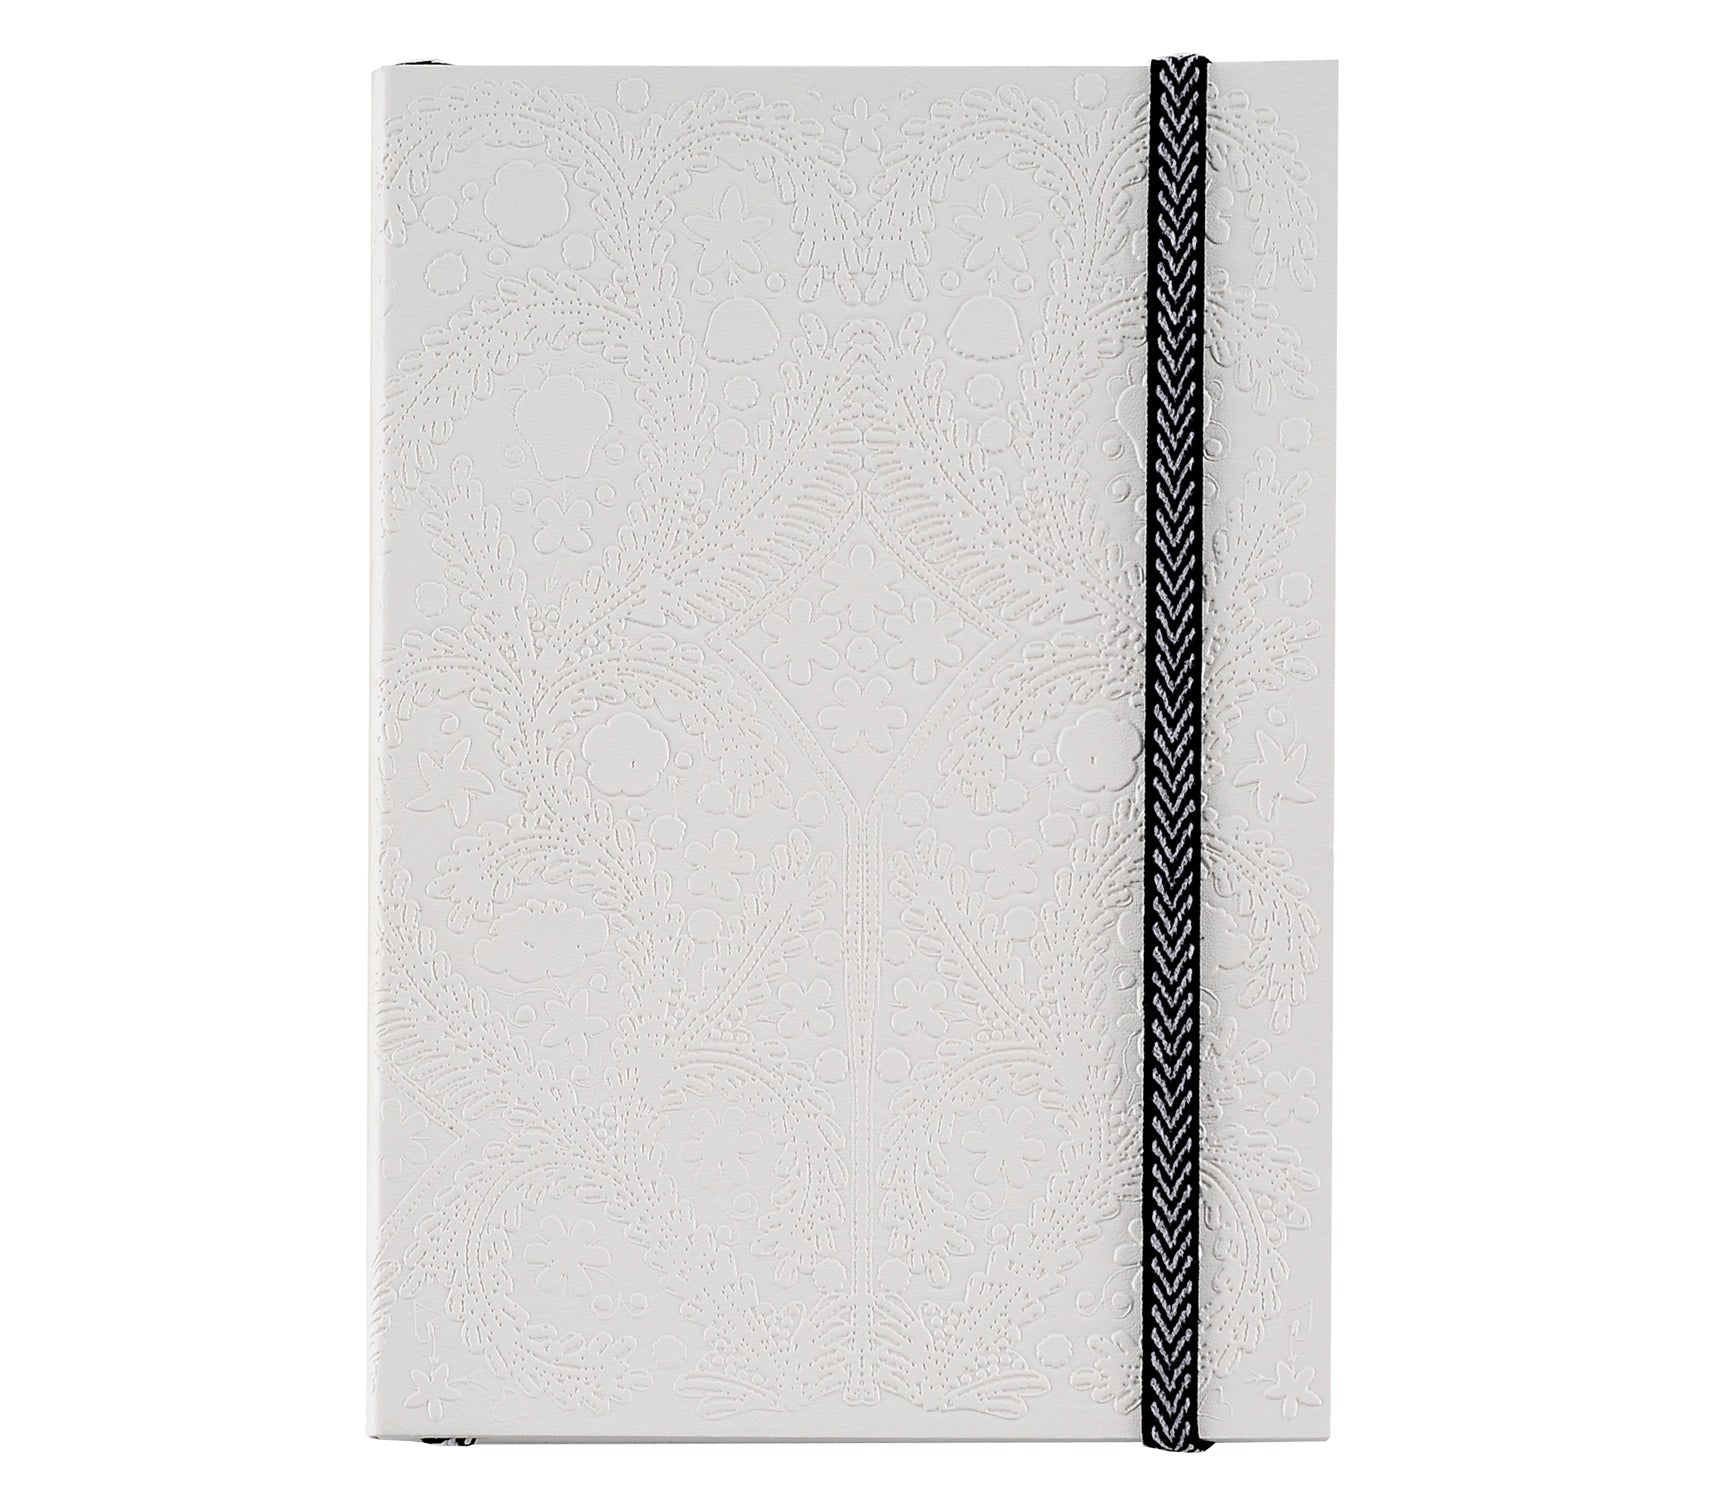 Embossed Paseo Pastis, Notebook M, CHRISTIAN LACROIX-VONMEL Luxe Gifts